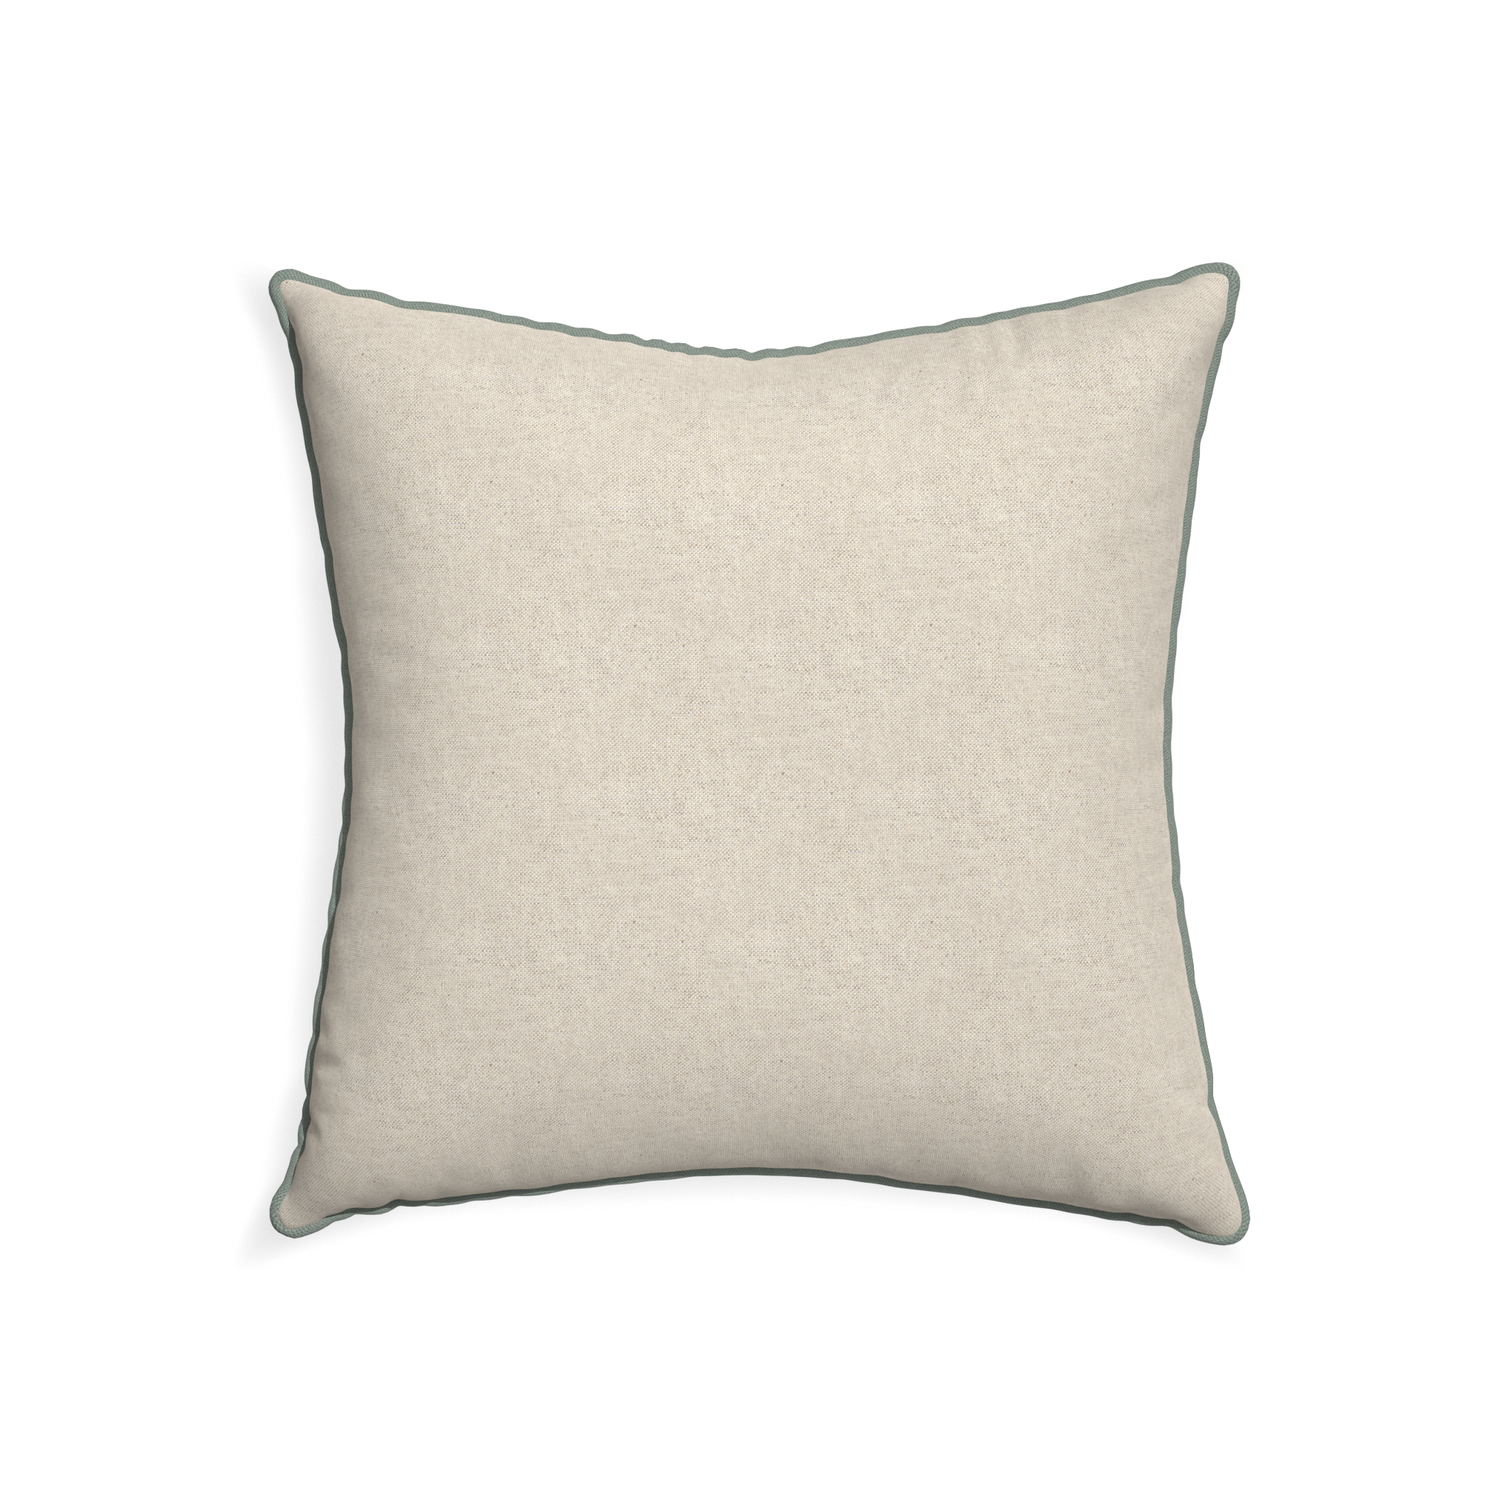 22-square oat custom light brownpillow with sage piping on white background